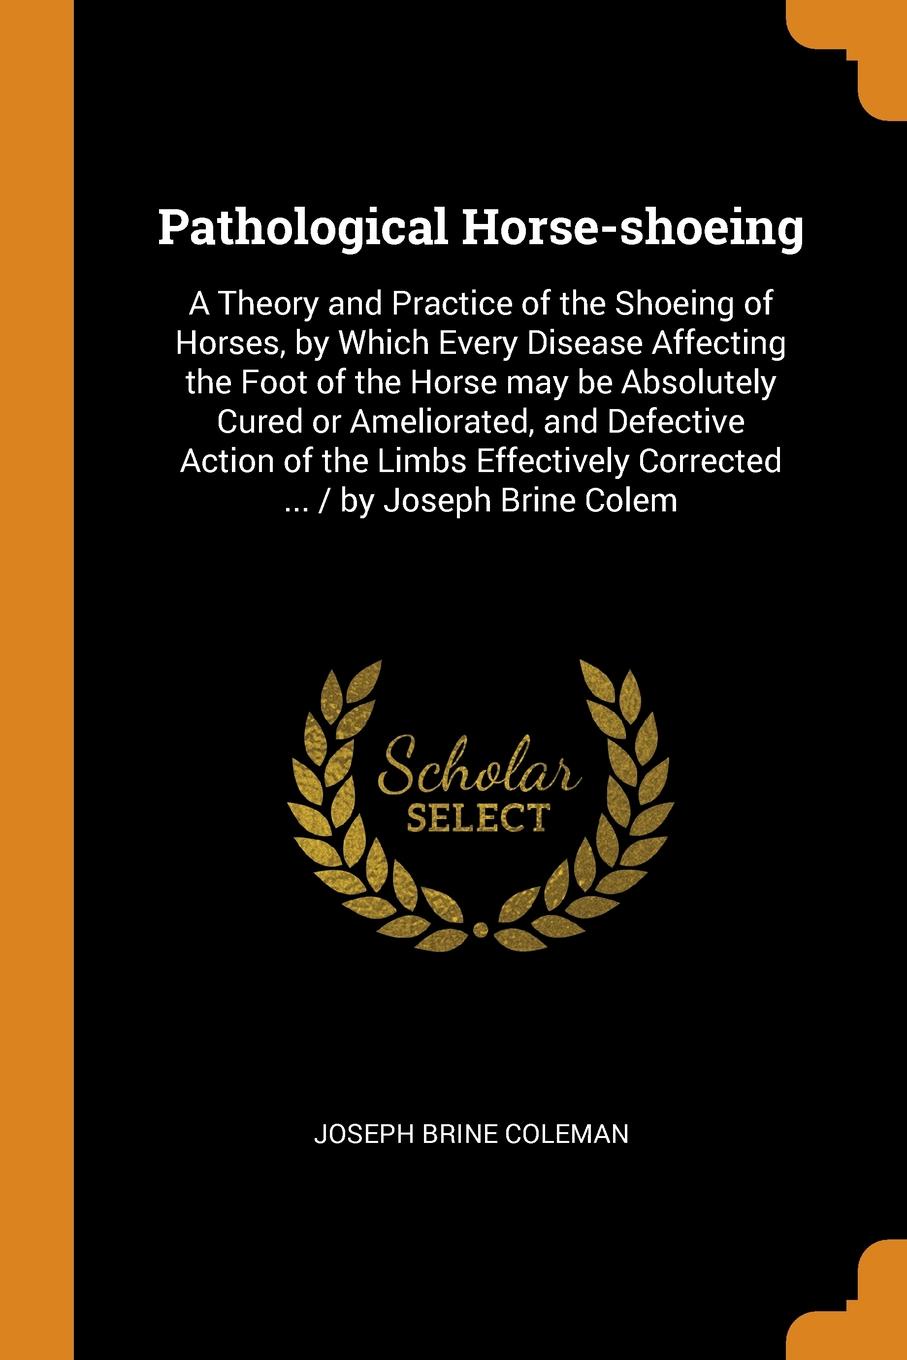 Pathological Horse-shoeing. A Theory and Practice of the Shoeing of Horses, by Which Every Disease Affecting the Foot of the Horse may be Absolutely Cured or Ameliorated, and Defective Action of the Limbs Effectively Corrected ... / by Joseph Brin...